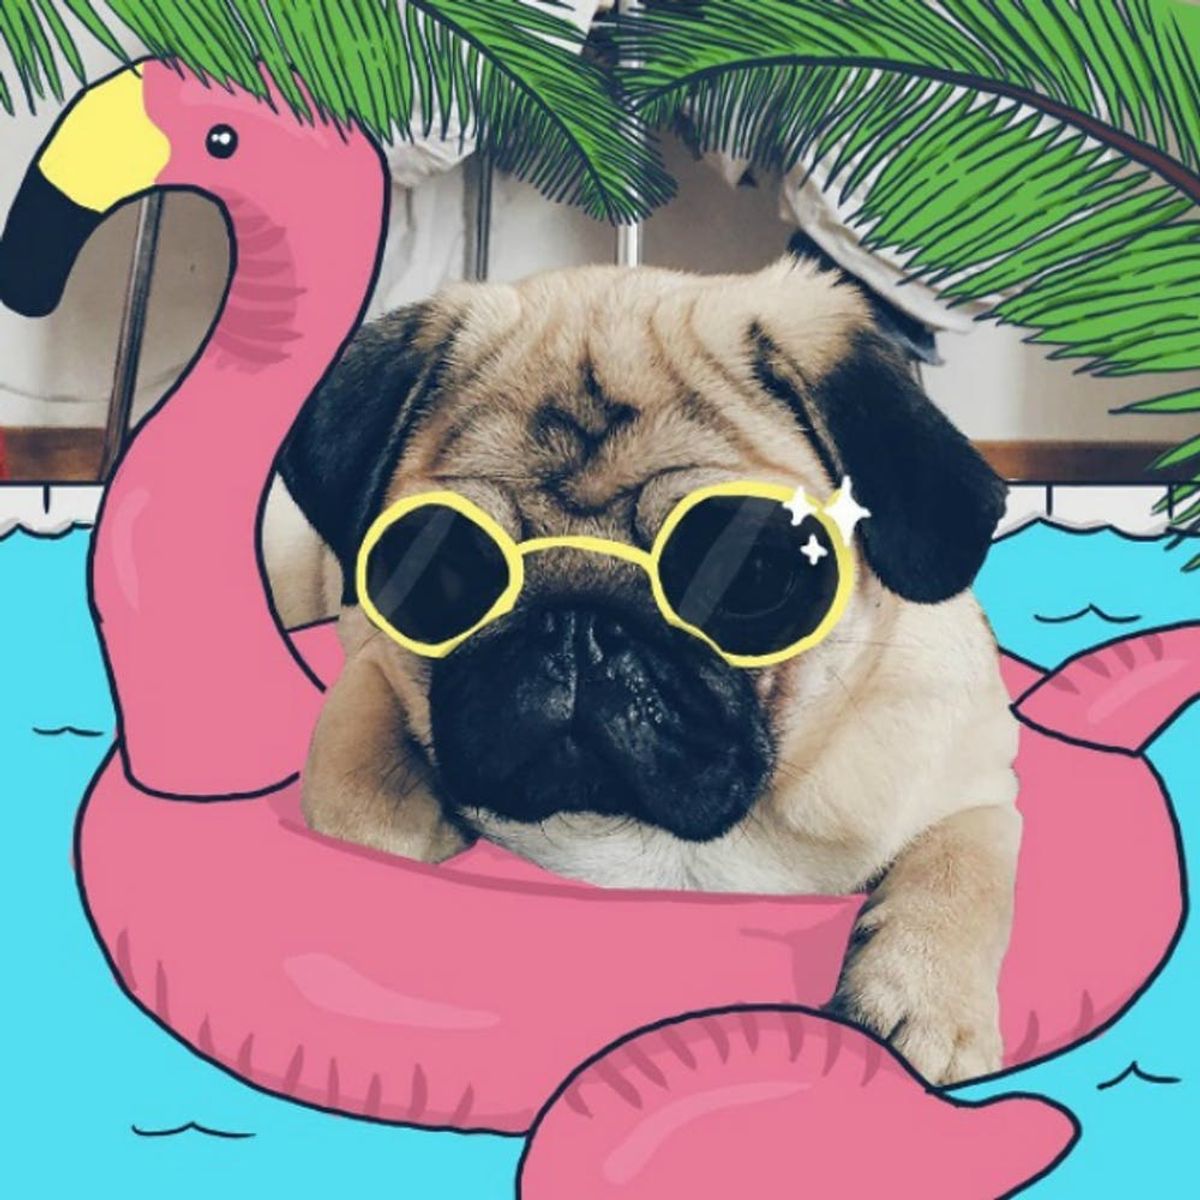 This Artist’s Pug Doodles Will Make Your Day Better